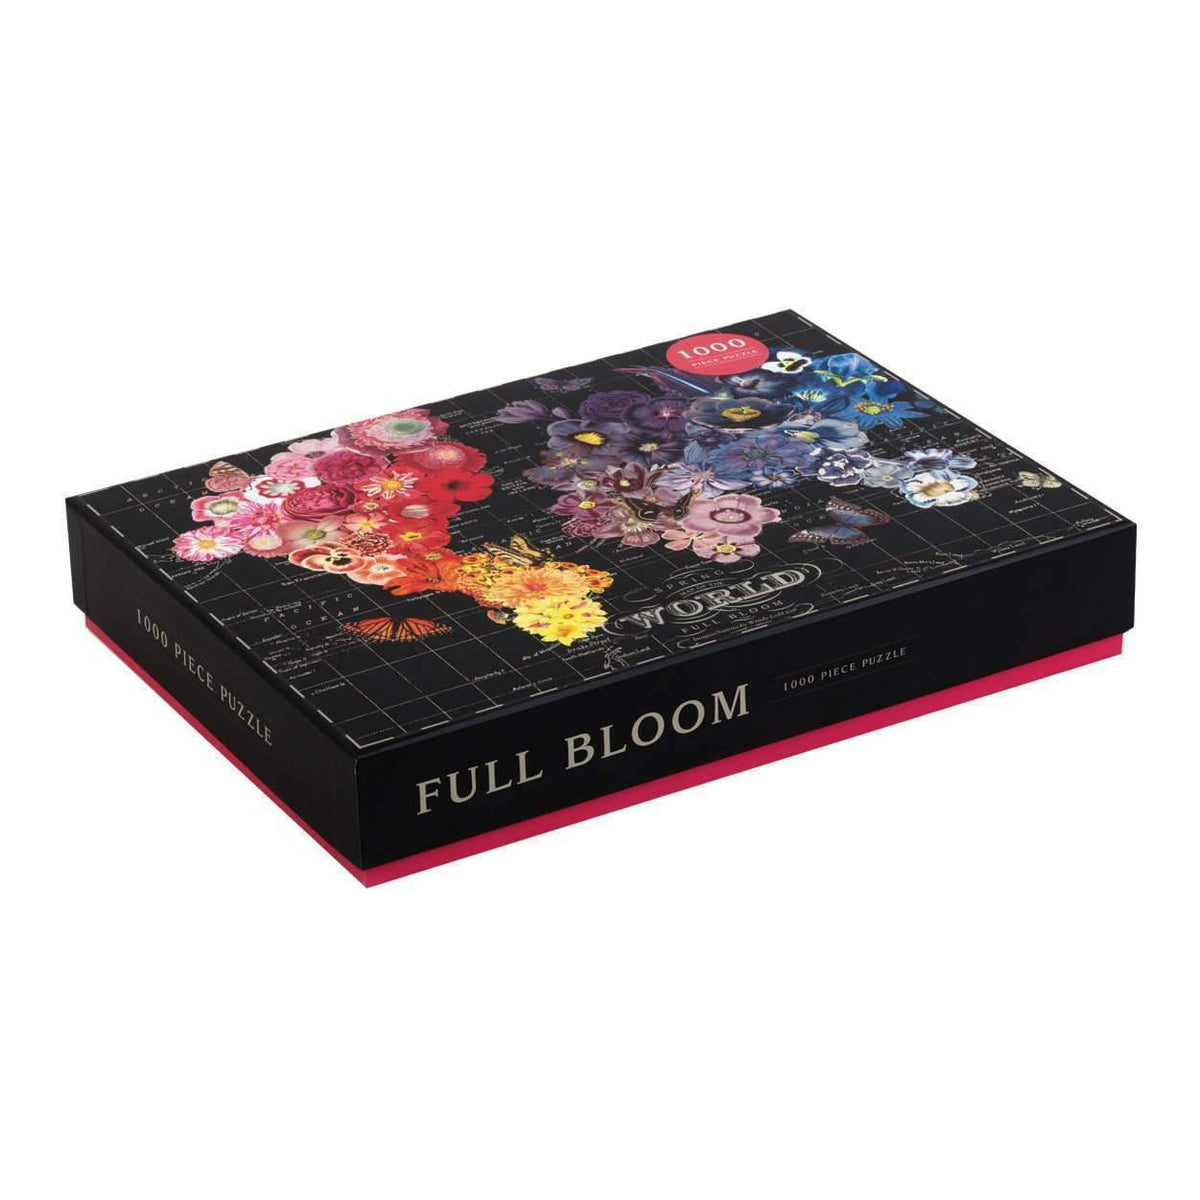 Wendy Gold Full Bloom 1000 Piece Puzzle 1000 Piece Puzzles Galison 